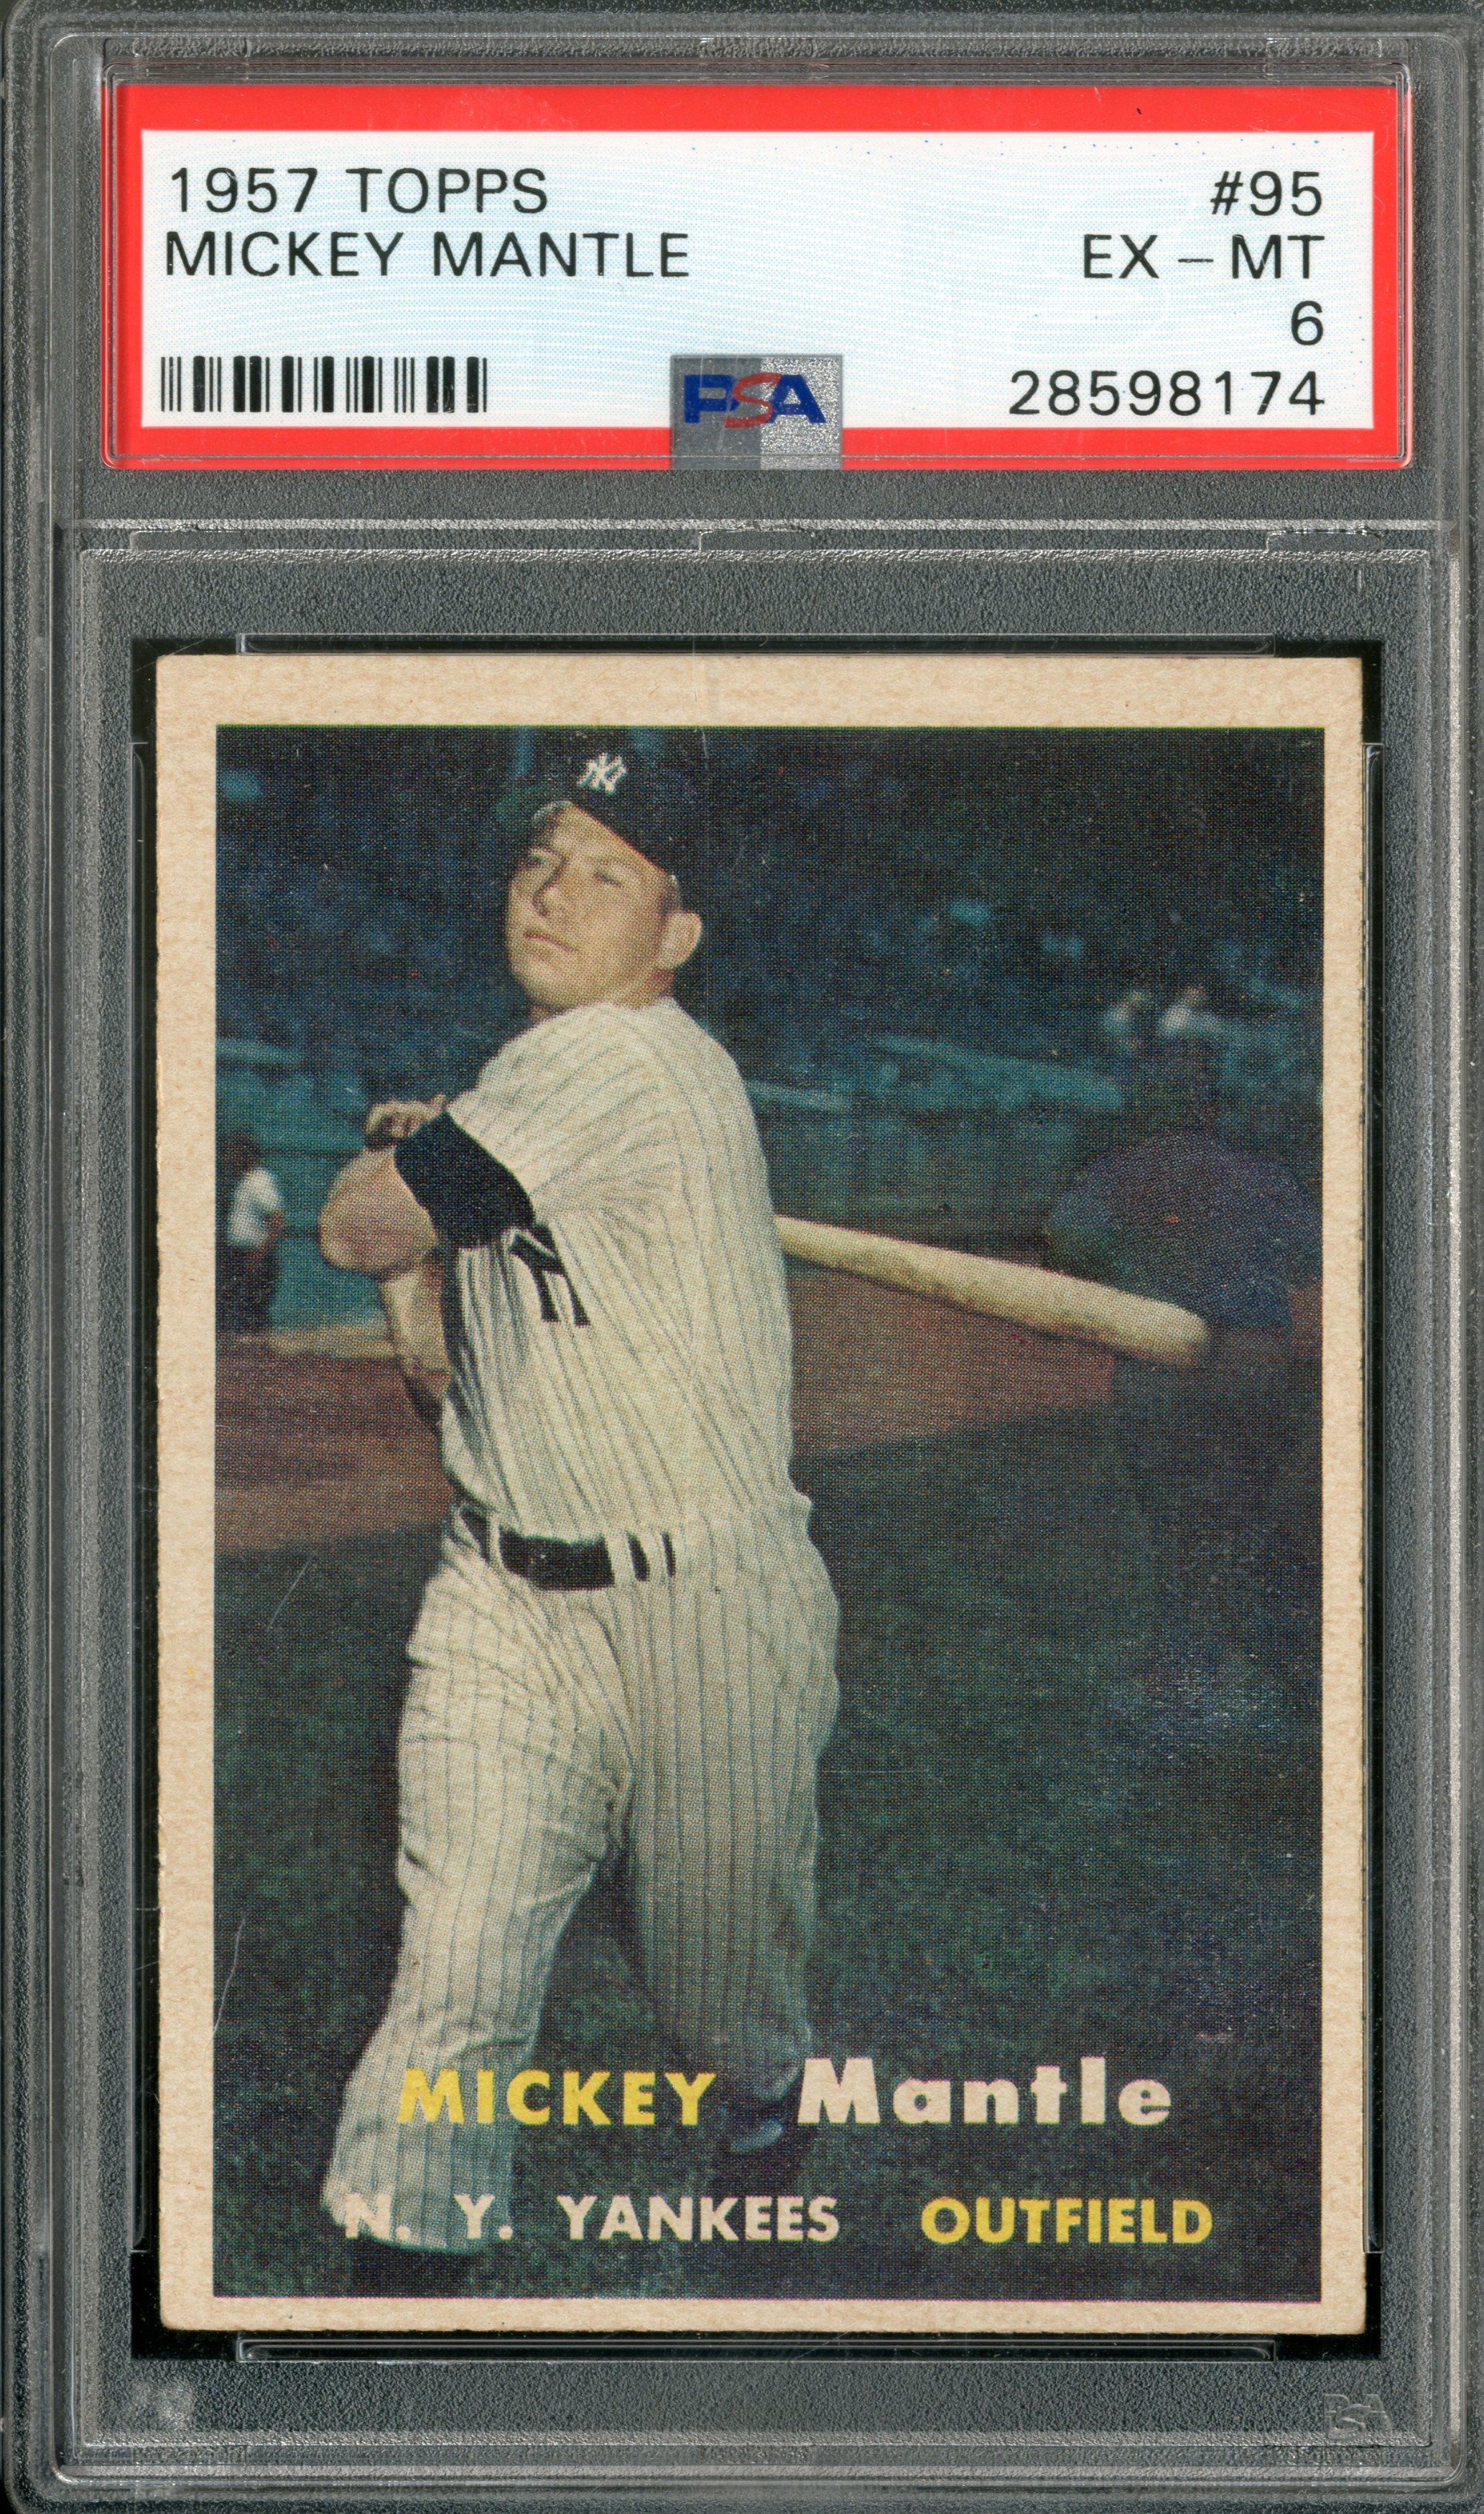 Baseball and Trading Cards - 1957 Topps #95 Mickey Mantle - PSA EX-MT 6